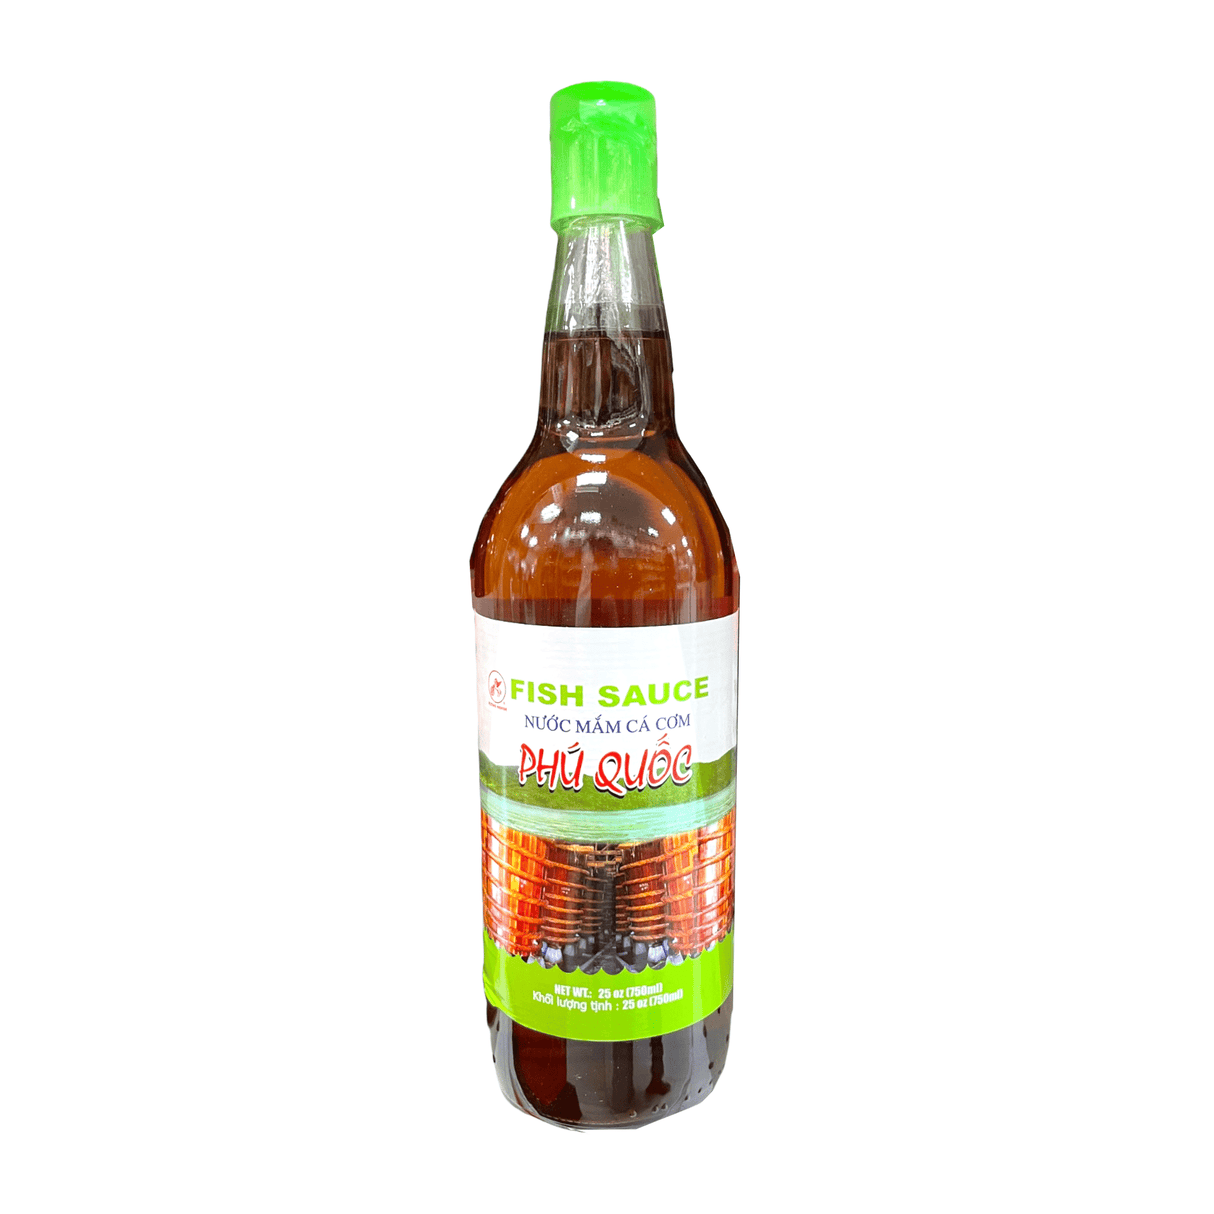 Flying Horse Fish Sauce